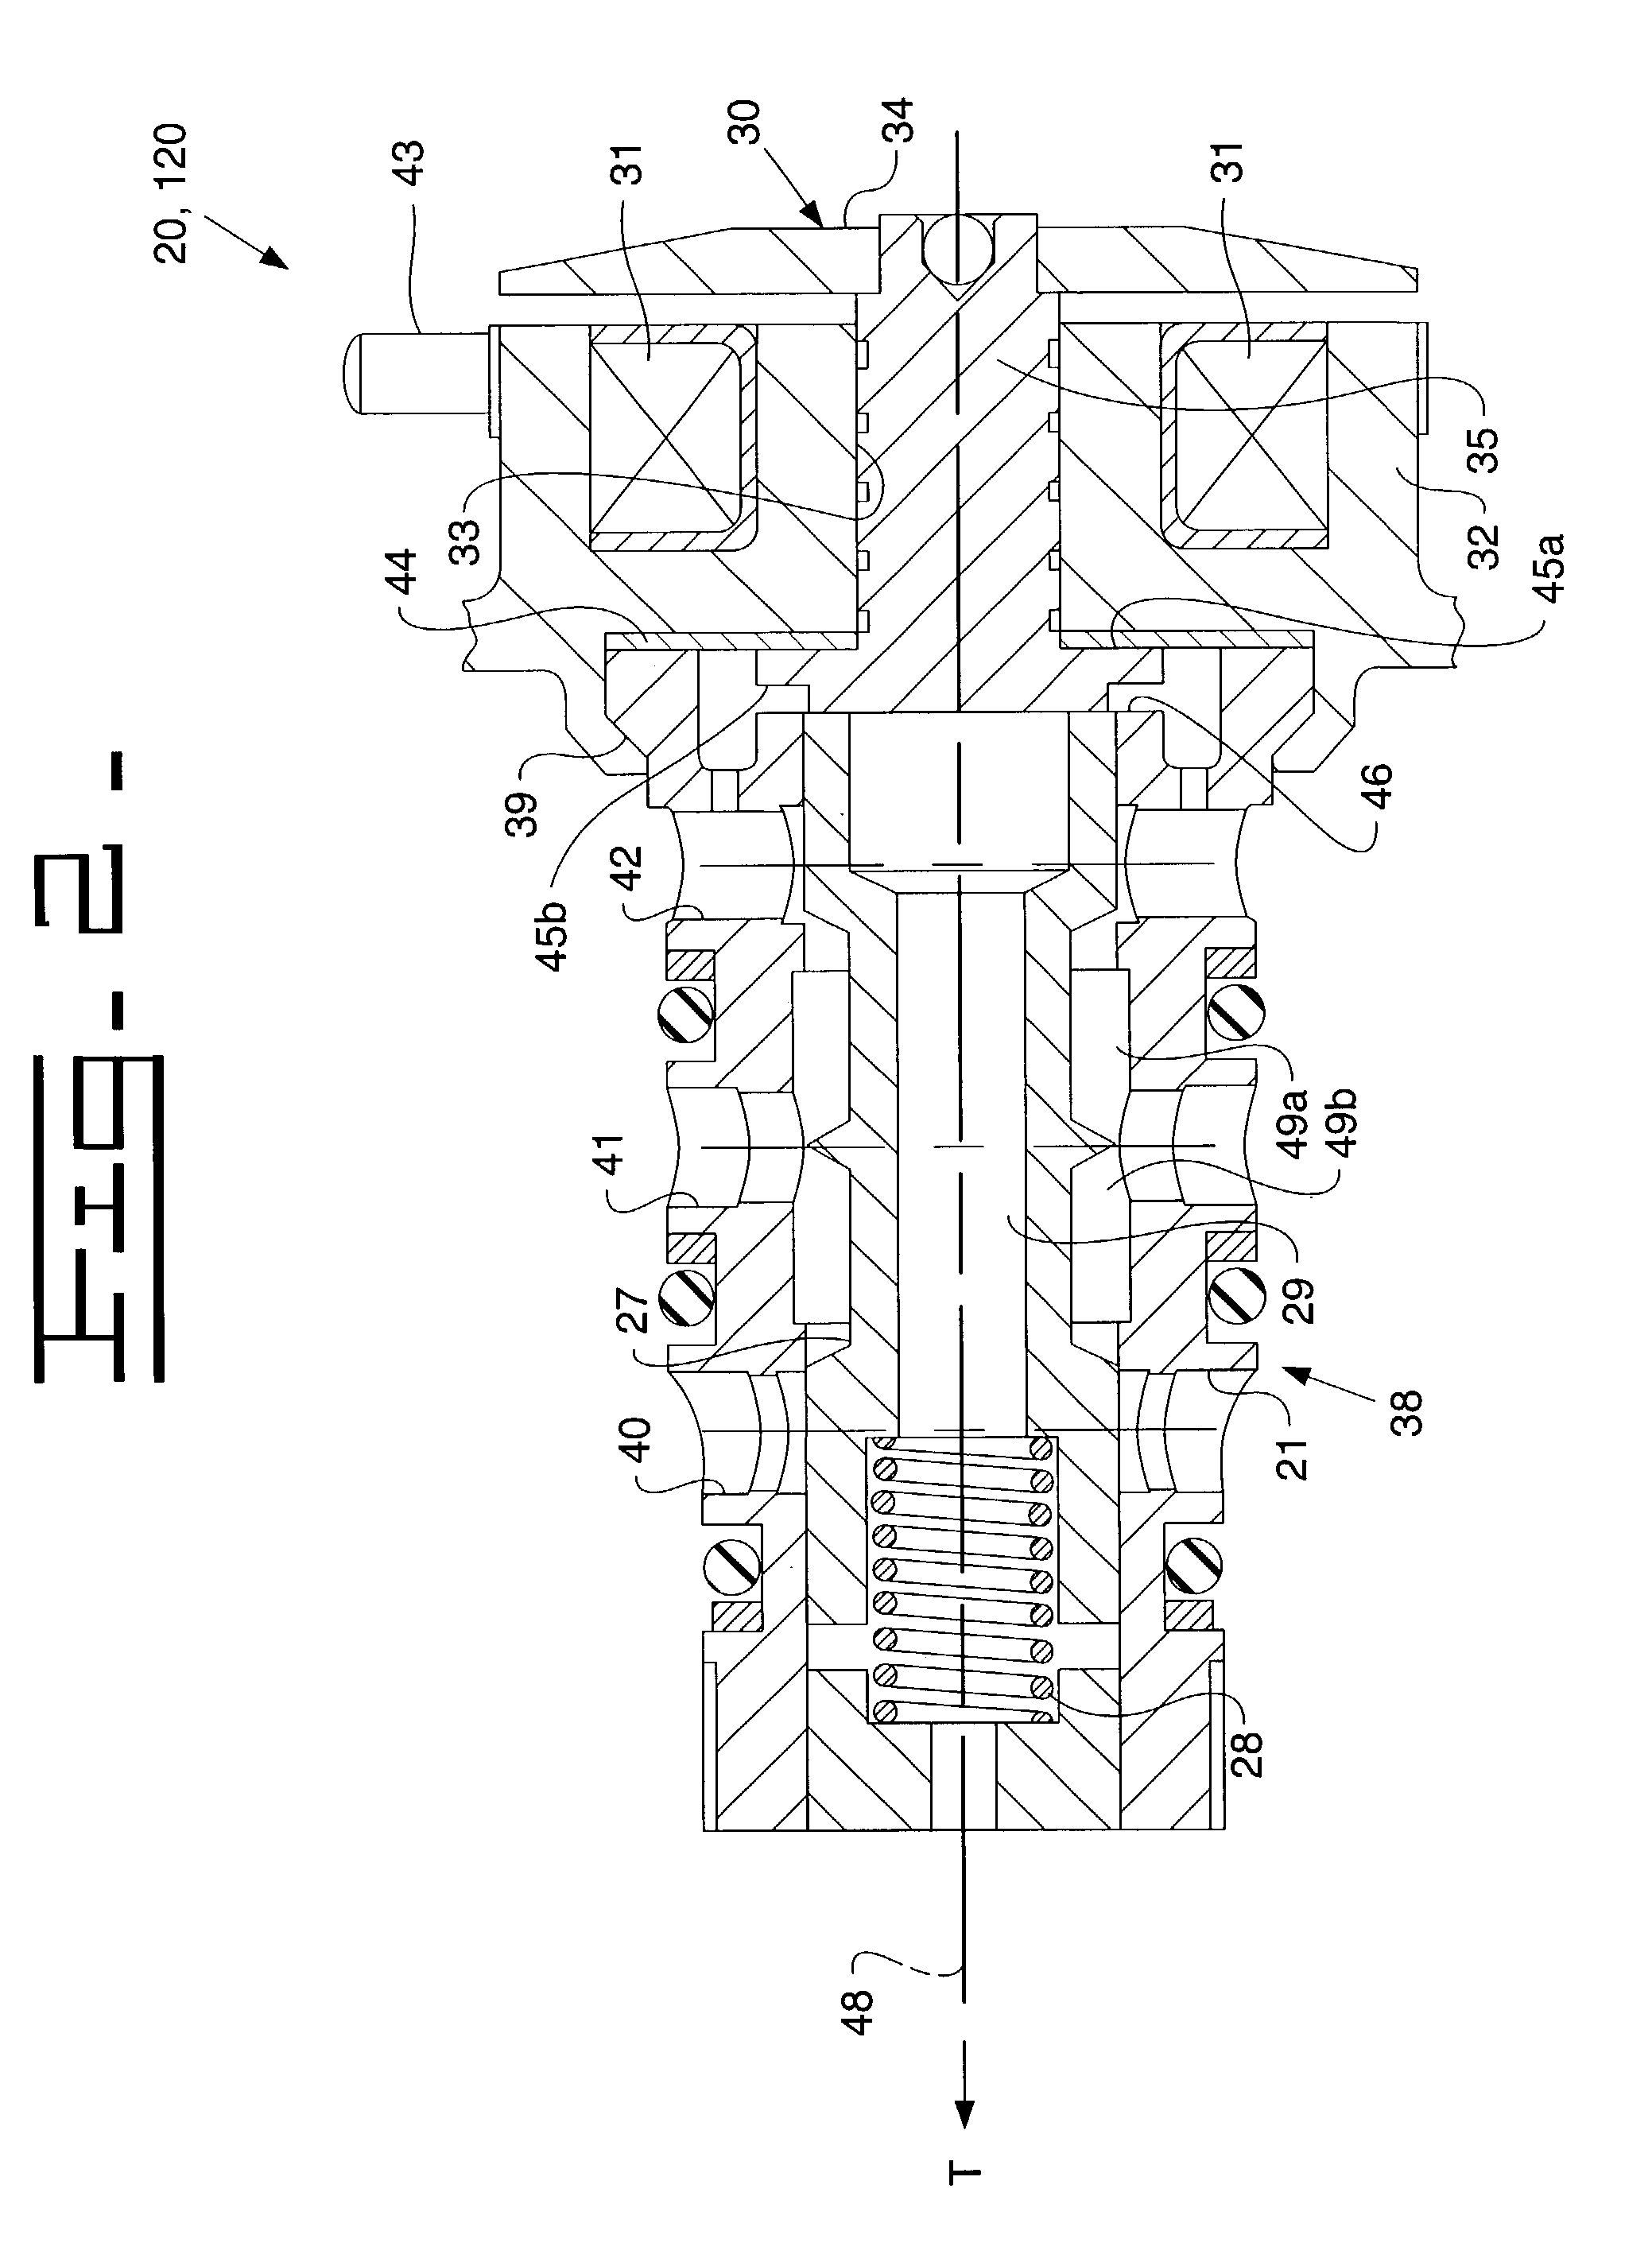 Electrically controlled fluid system with ability to operate at low energy conditions